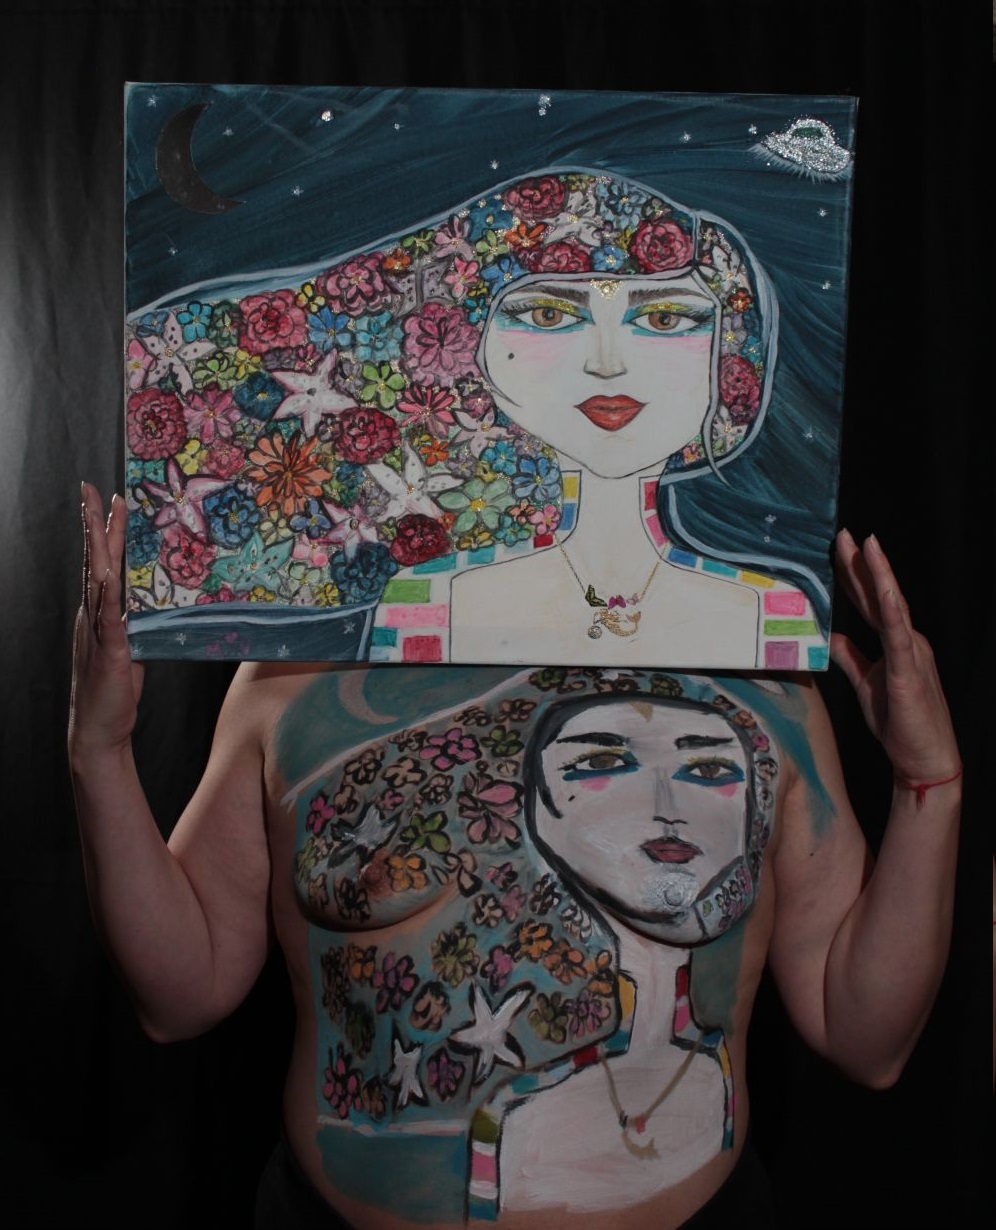 painting of female face with stars in hair against a night sky with a spaceship in the background on canvas held above copy on woman's torso